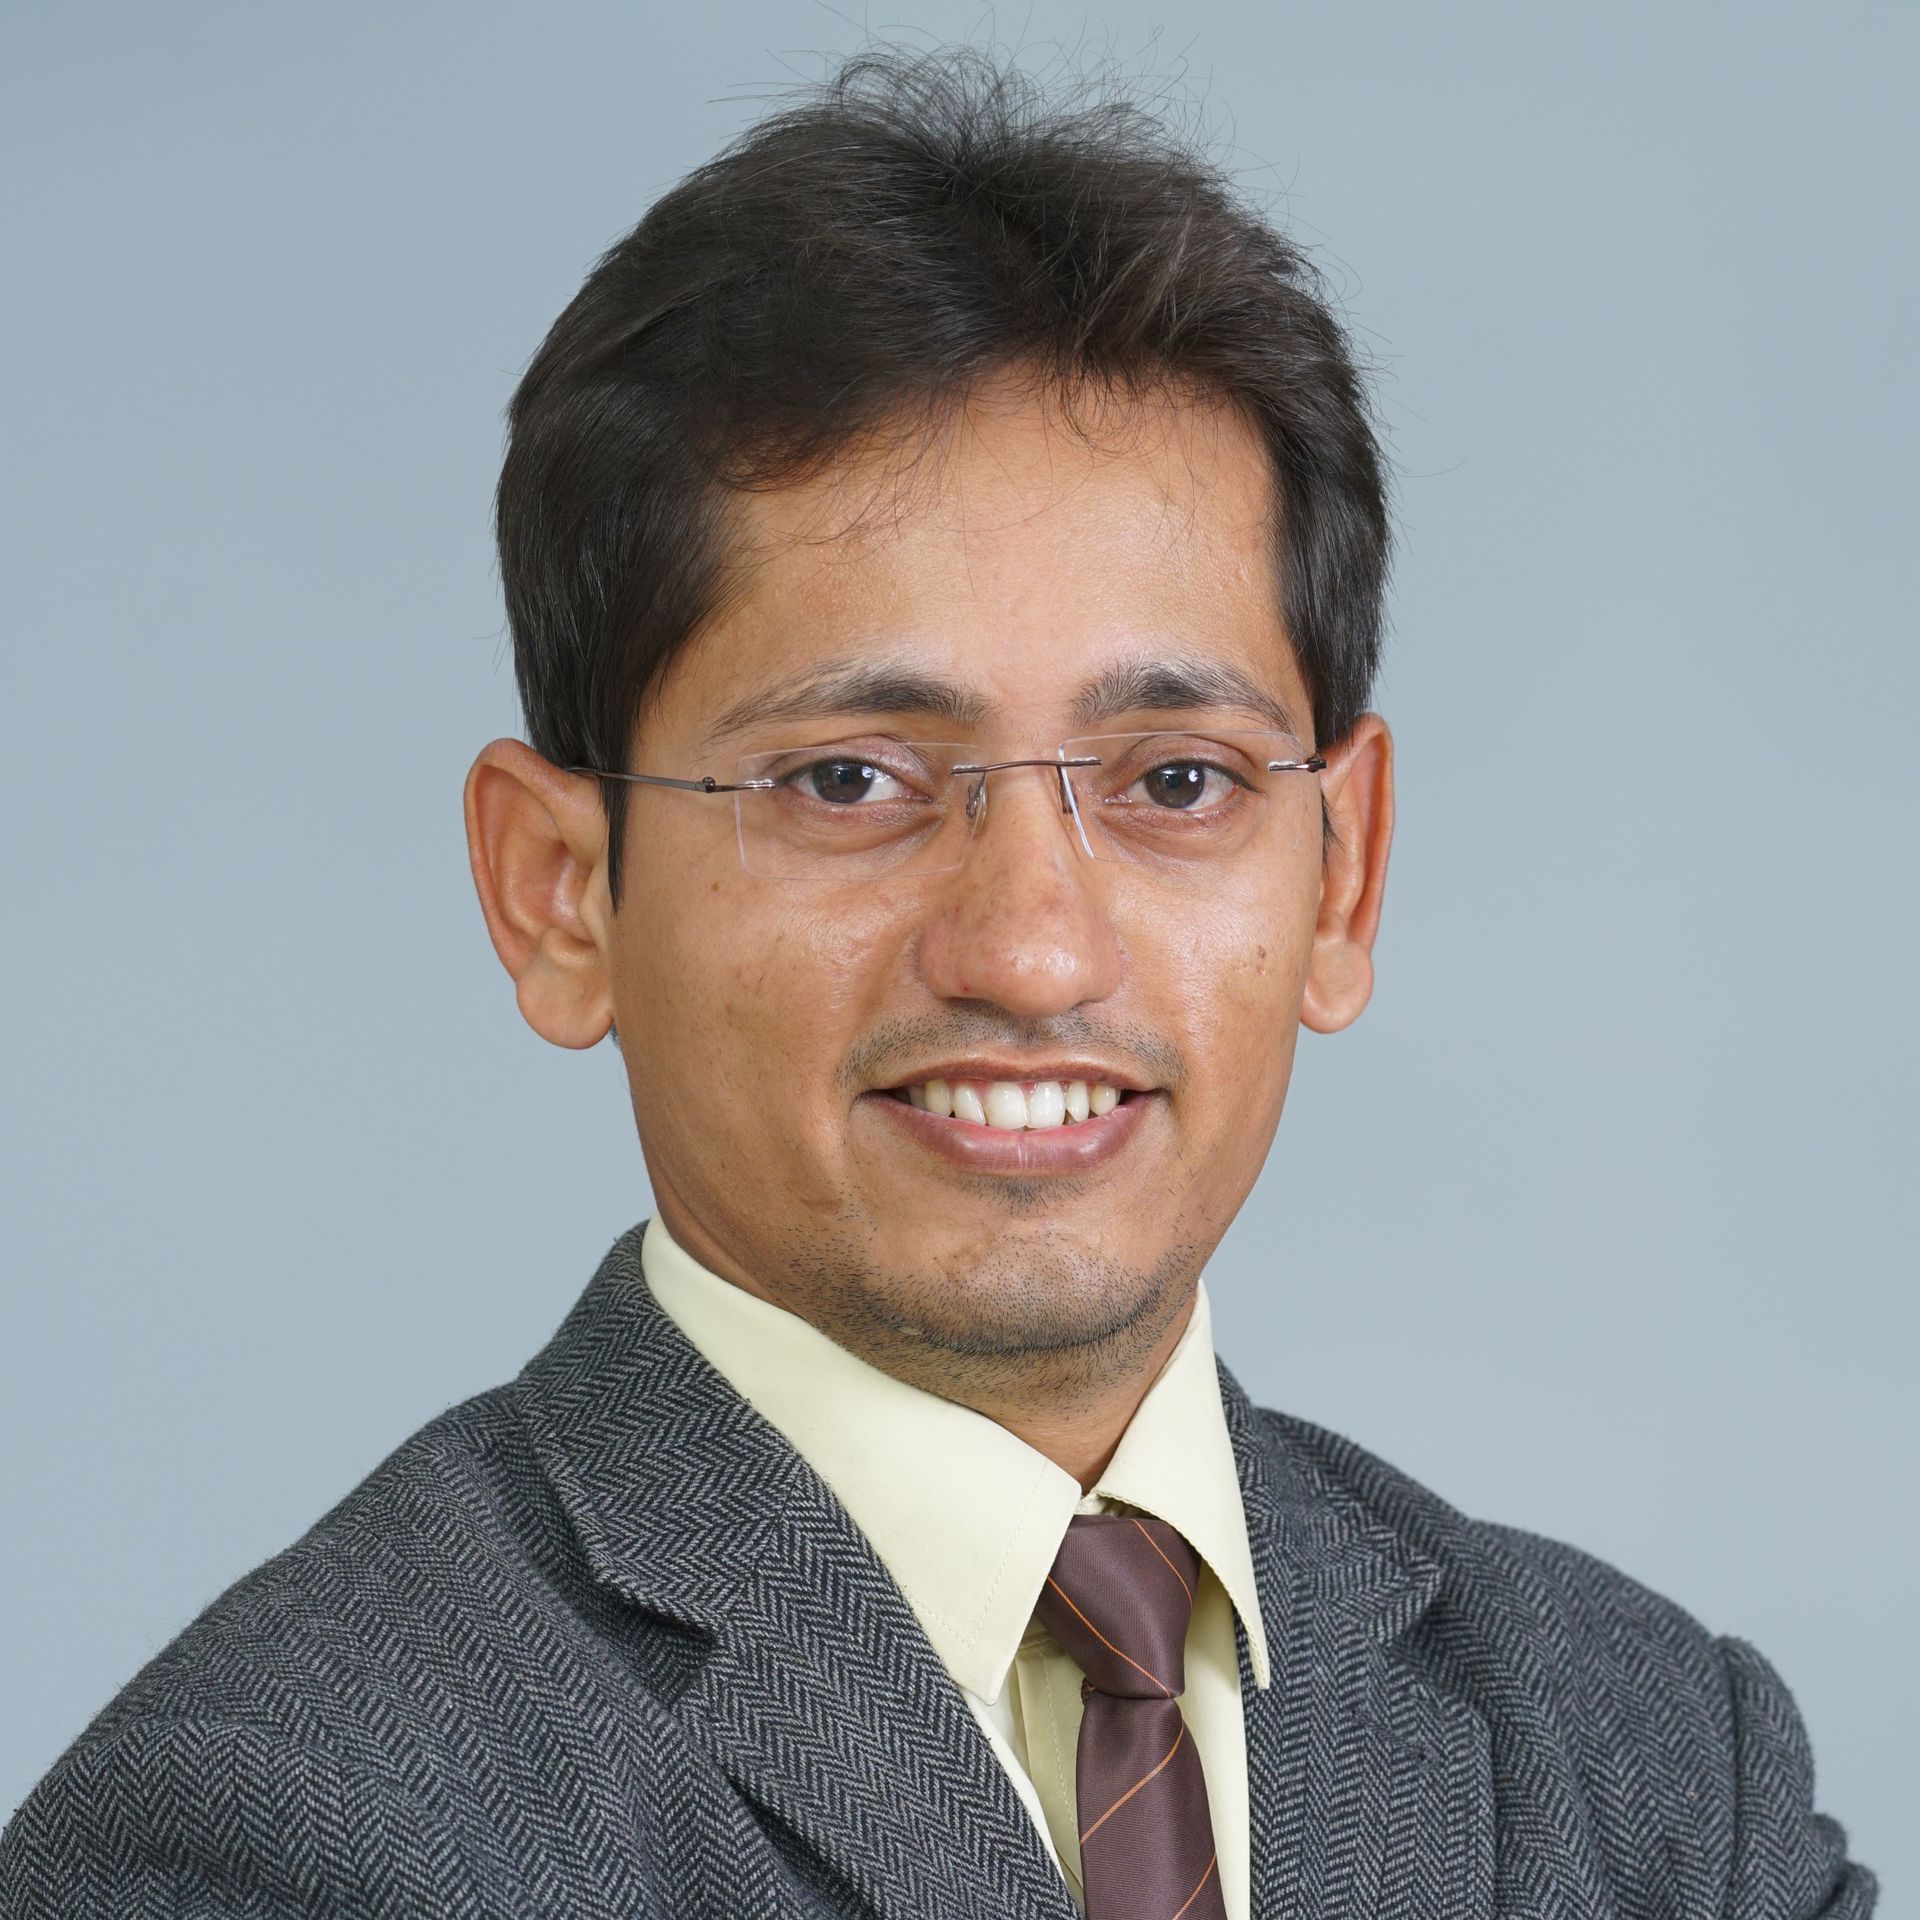 Dr Anand Agroya | Orthopedician, Arthroscopy, Sports Medicine Specialist and Joint Replacement Surgeon